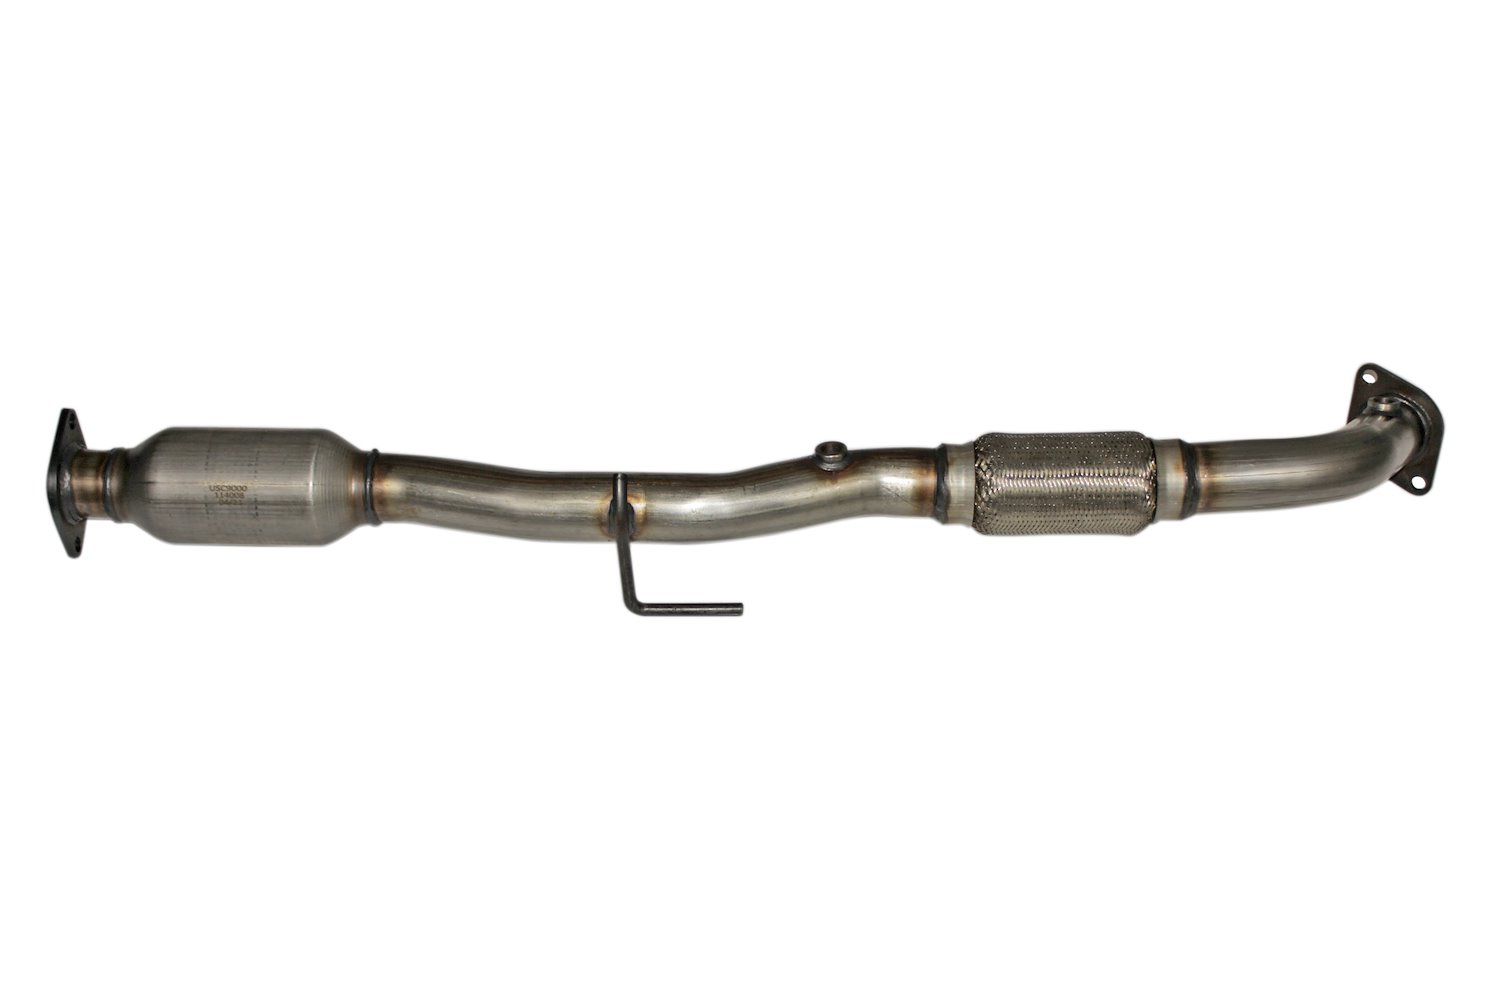 Catalytic Converter Fits 2002-2008 Toyota Solara, 2002-2011 Toyota Camry w/2.4L DOHC 4 cyl. Eng. [Rear]